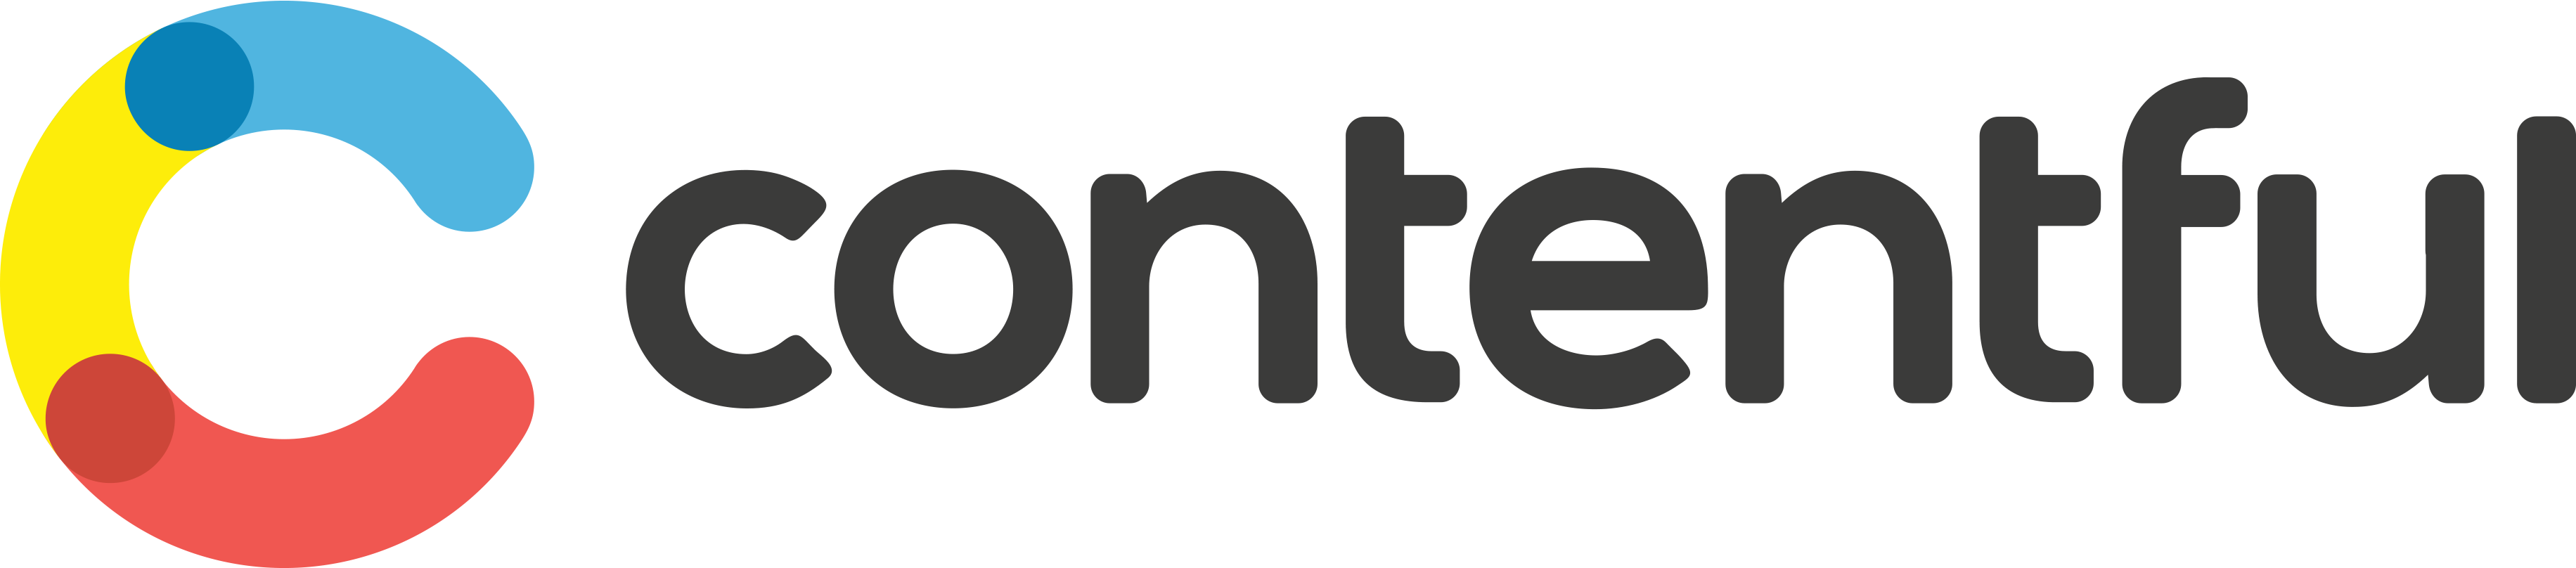 Contentful logo png - From too many CMSes to a single content hub